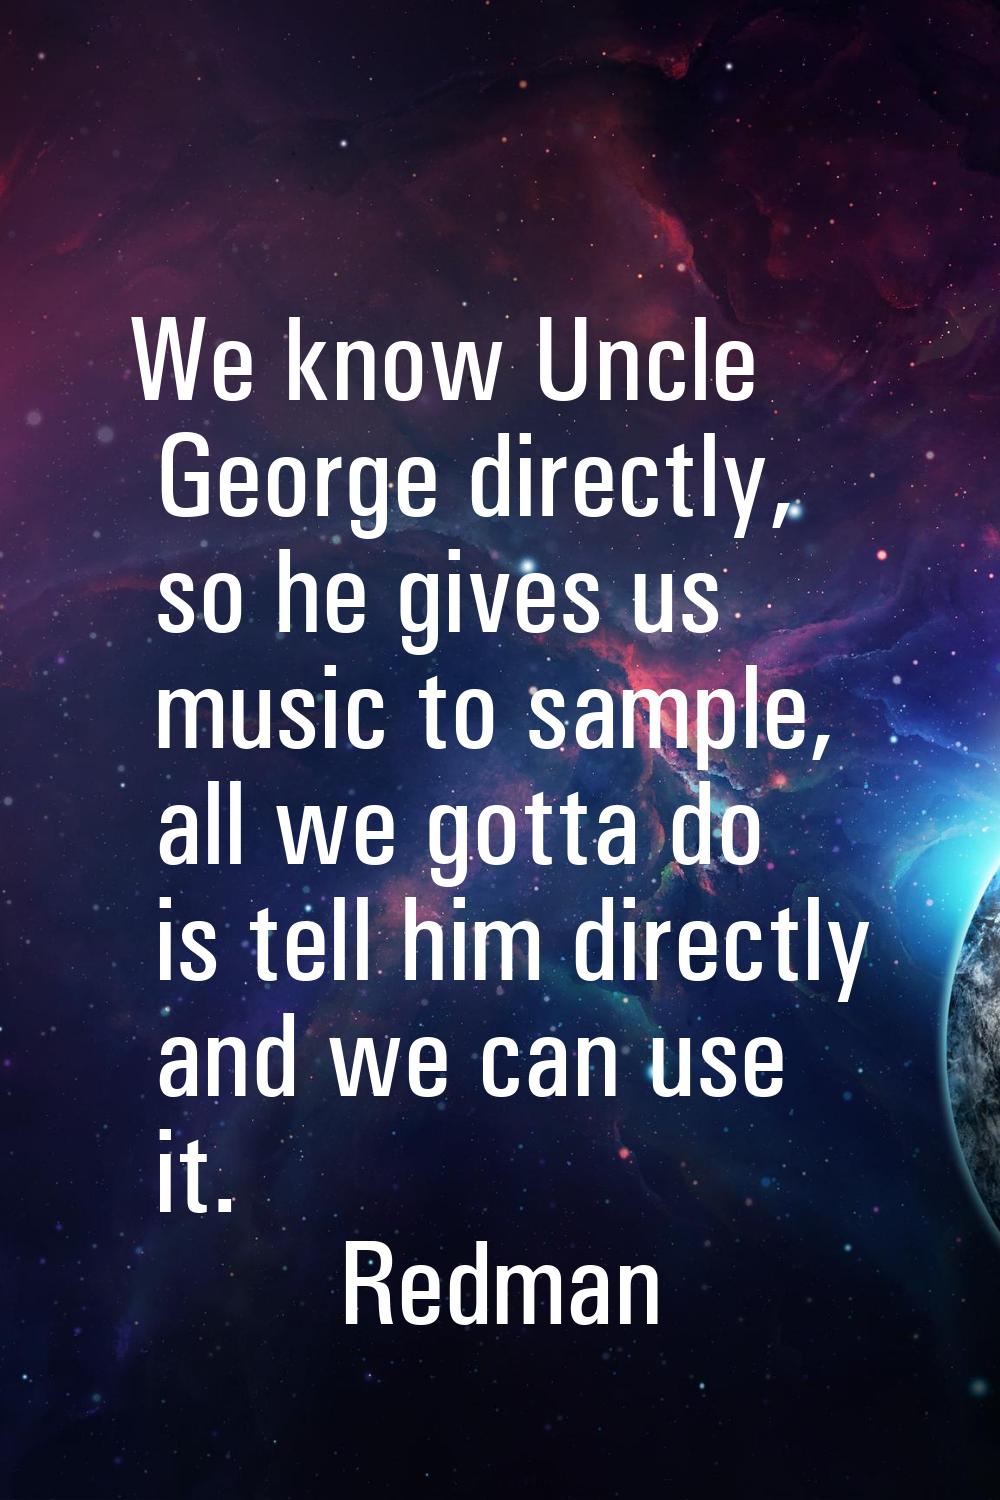 We know Uncle George directly, so he gives us music to sample, all we gotta do is tell him directly